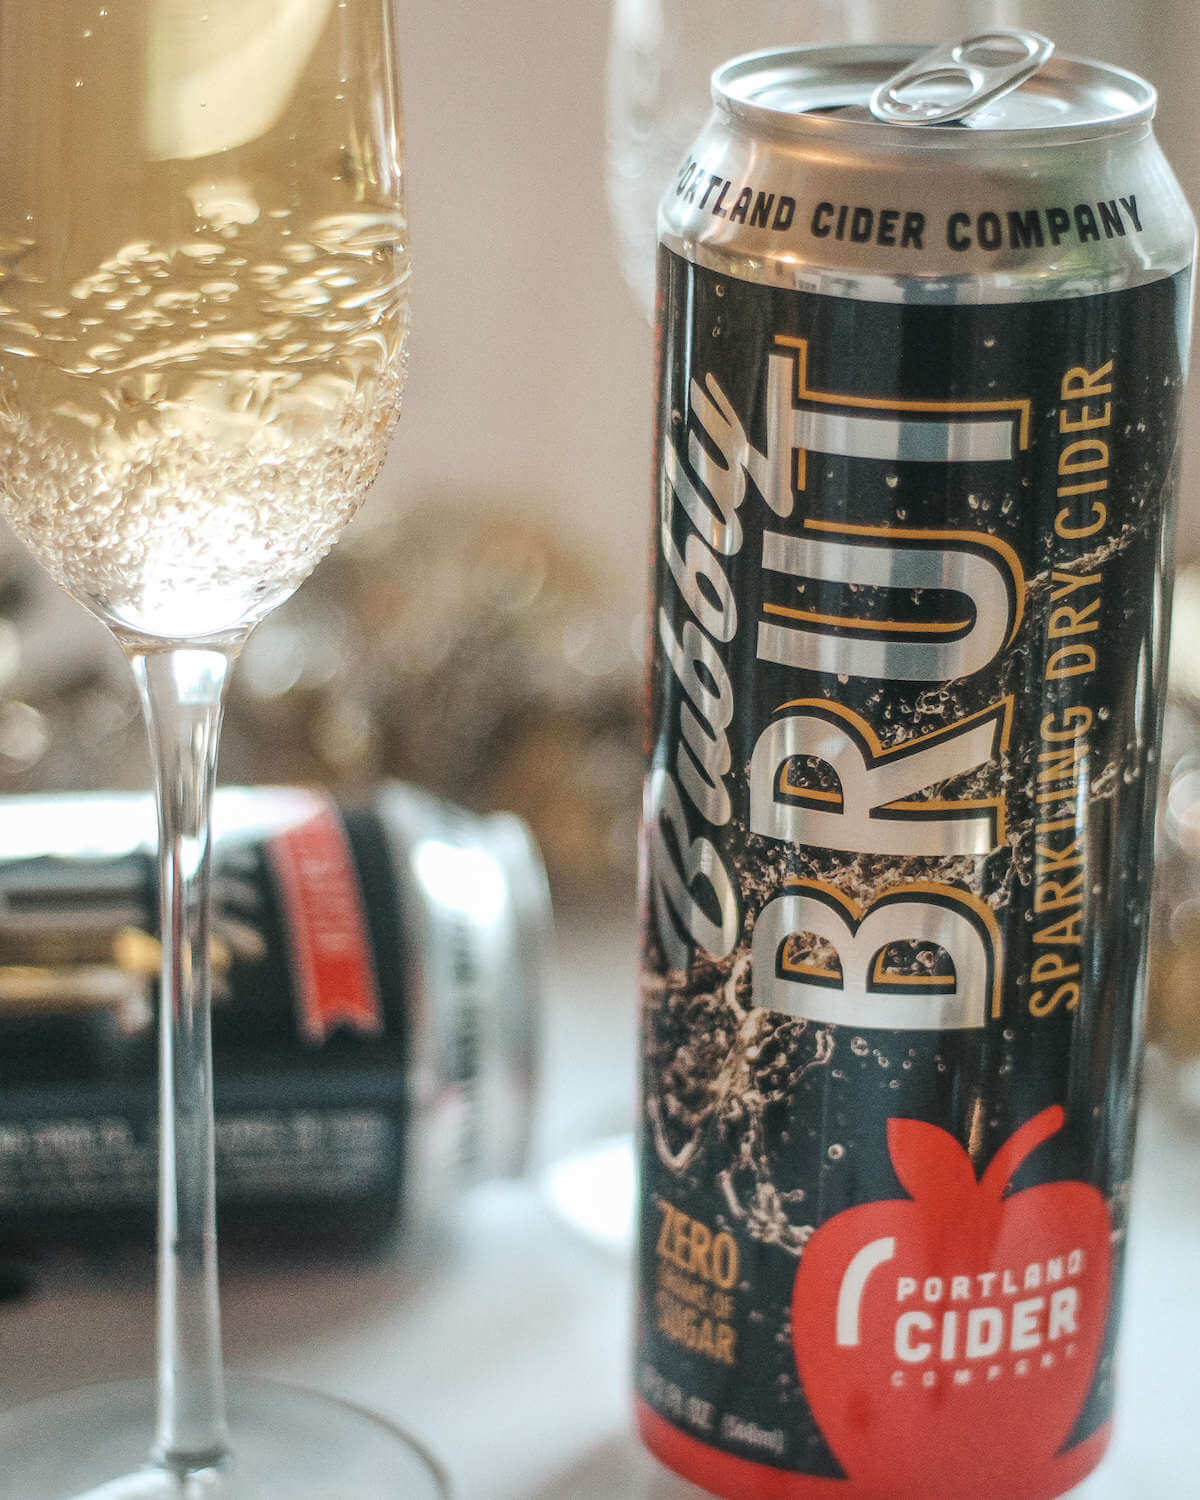 Portland Cider Company introduces Bubbly Brut for the new year